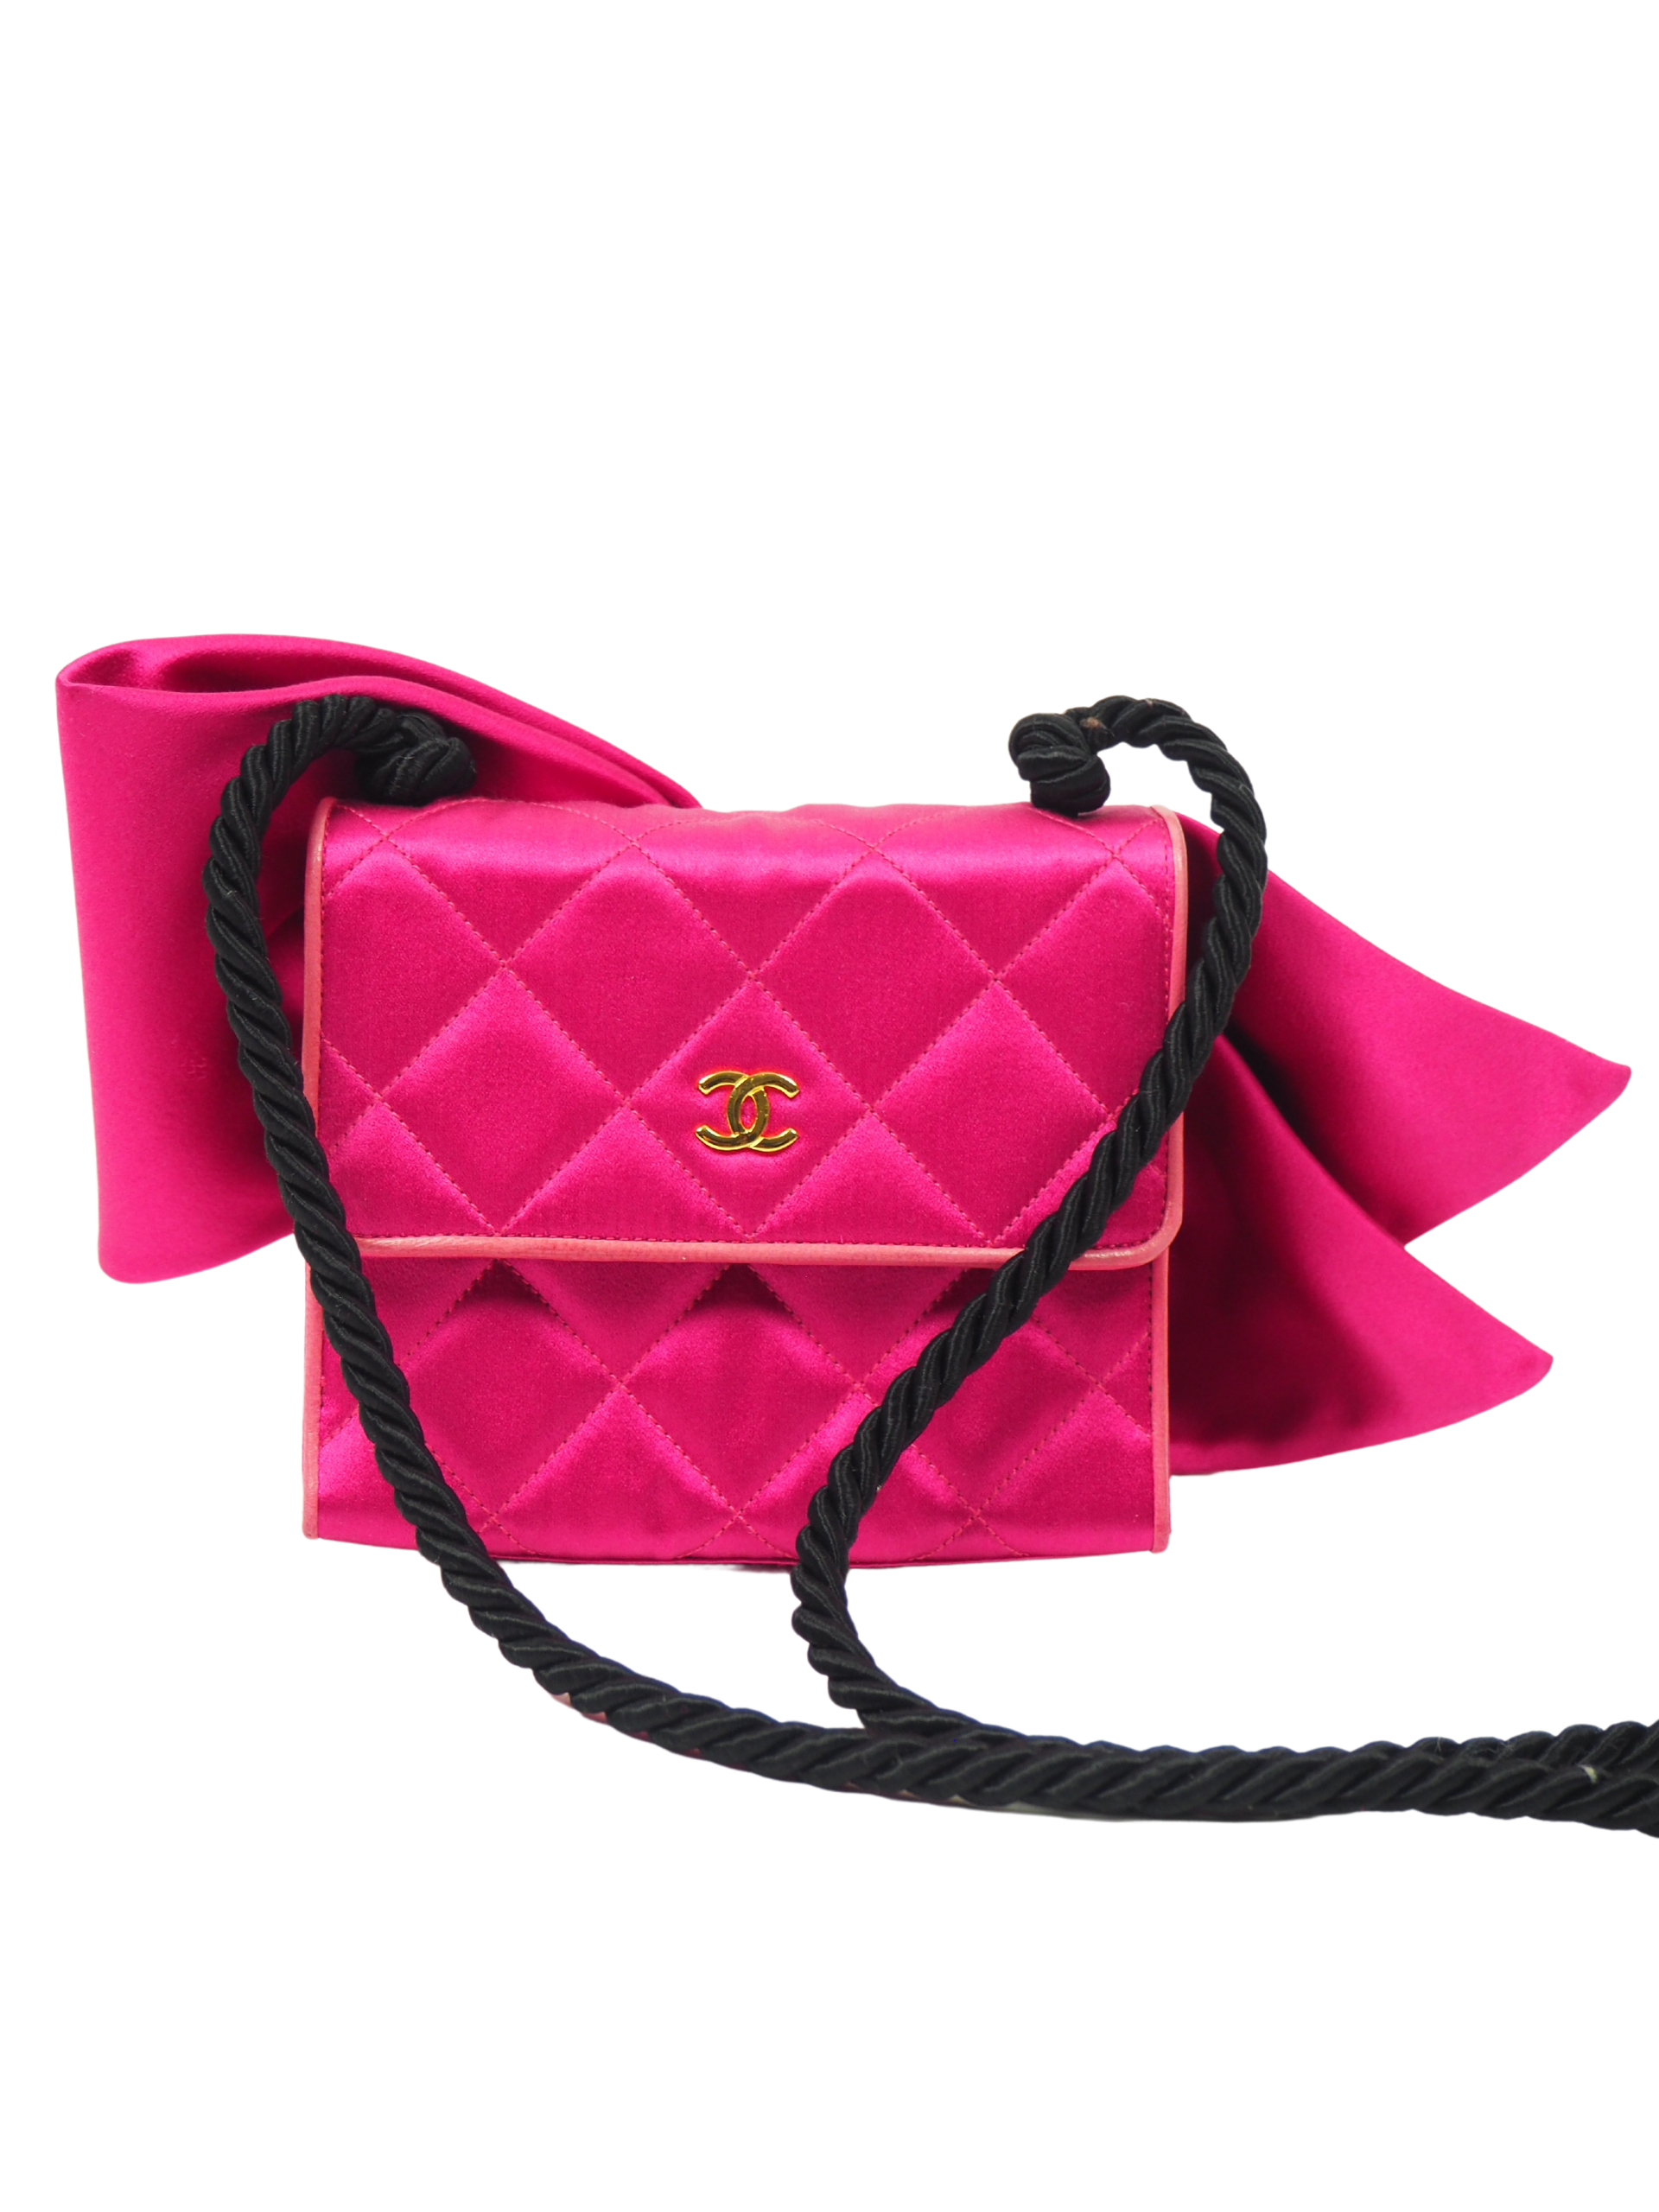  Chanel, Pre-Loved Pink Quilted Satin Bow Bag, Pink : Luxury  Stores